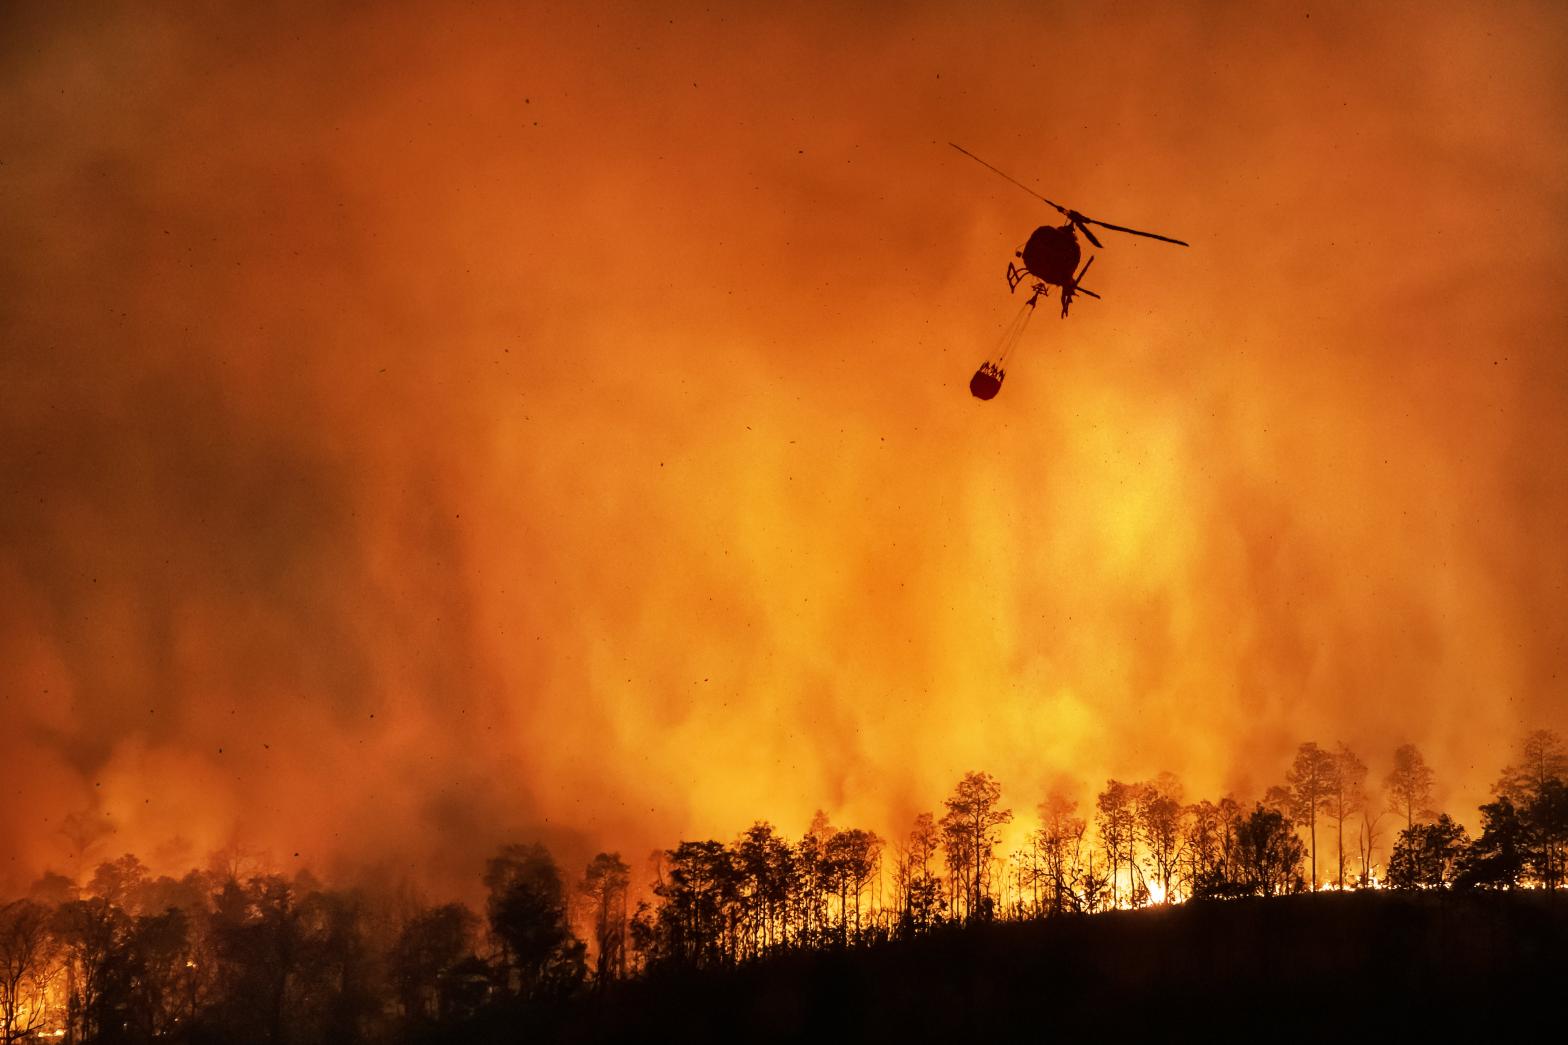 Increasing drought conditions in the American Southwest may be intensifying wildfire frequency. (Photo: Toa55, iStock by Getty Images)